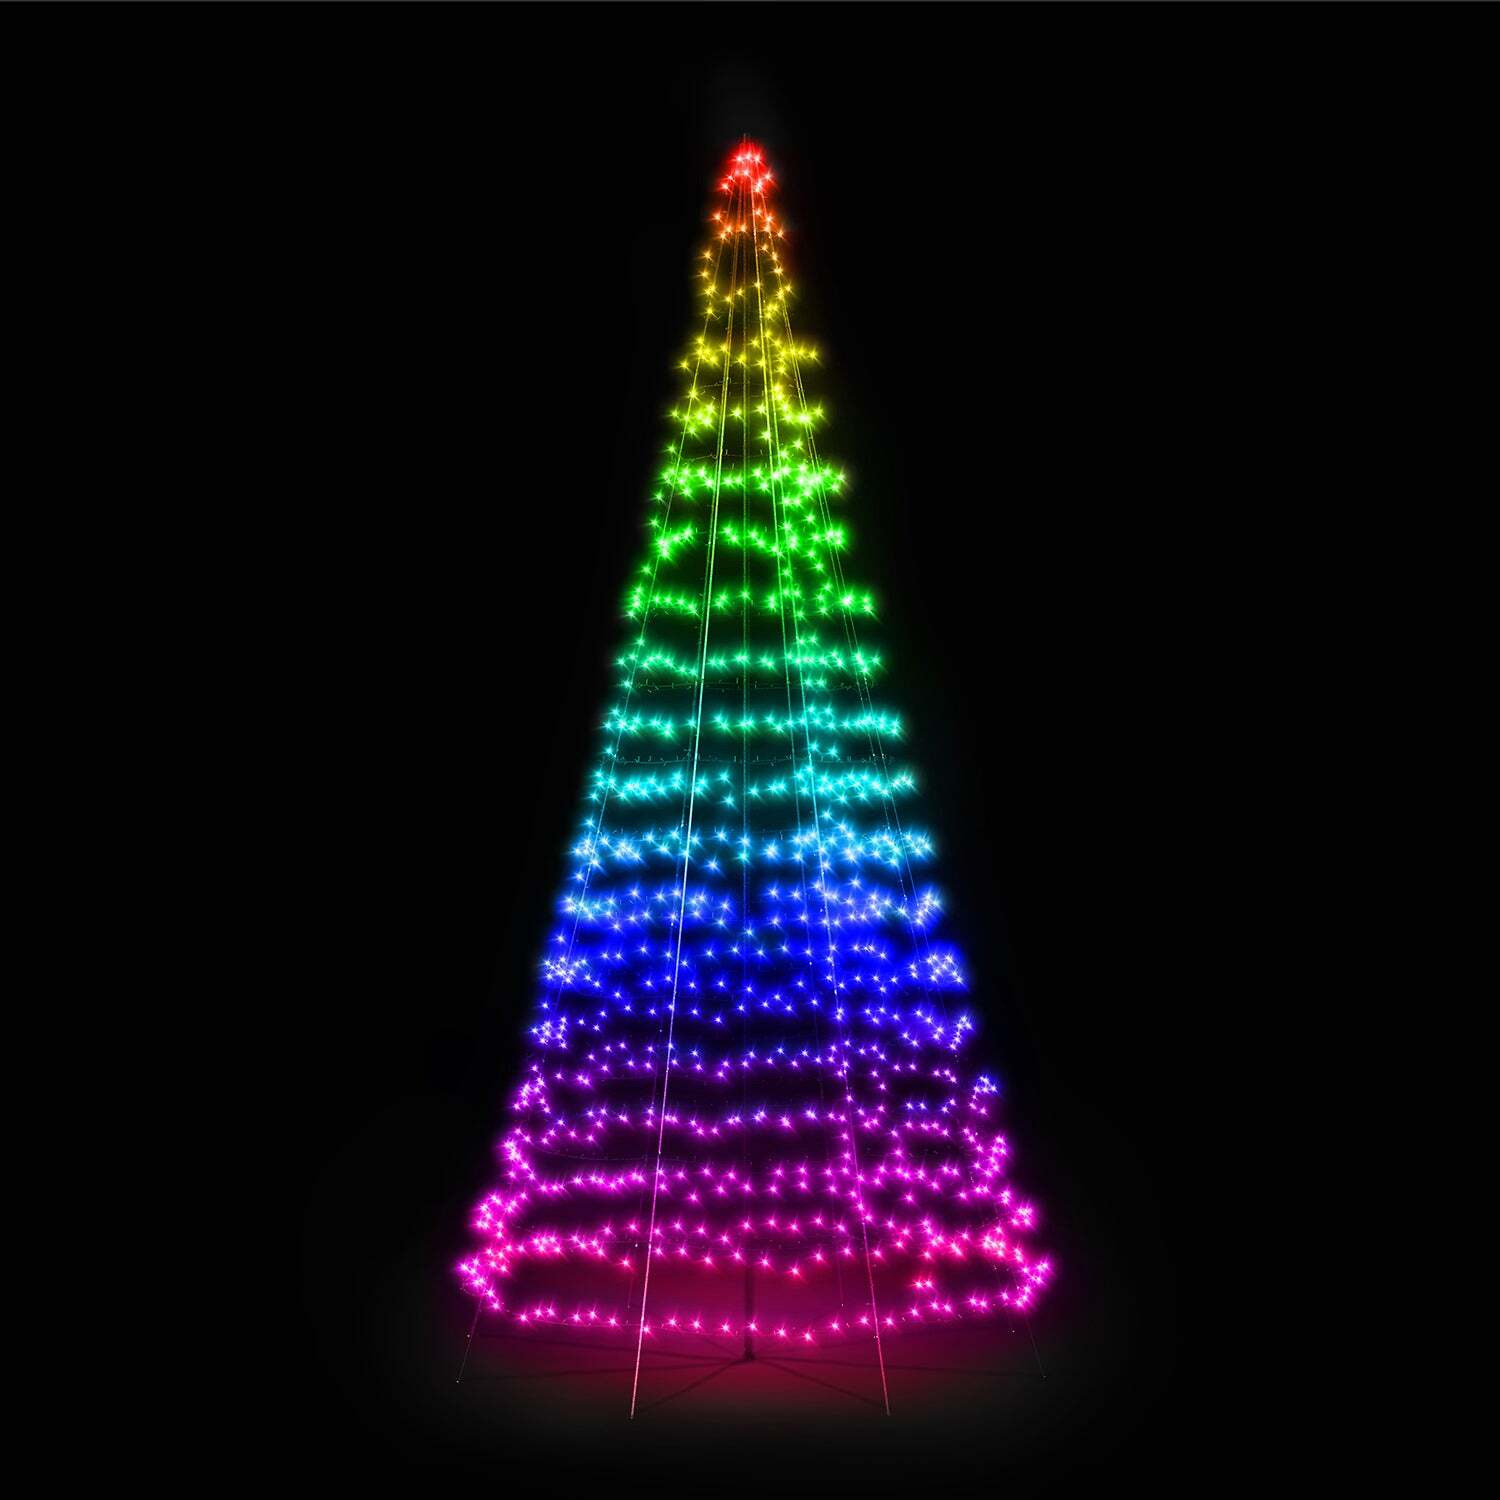 4m 750 LED Twinkly Smart App Controlled Outdoor Christmas Tree Multi Coloured & White Edition - image 1